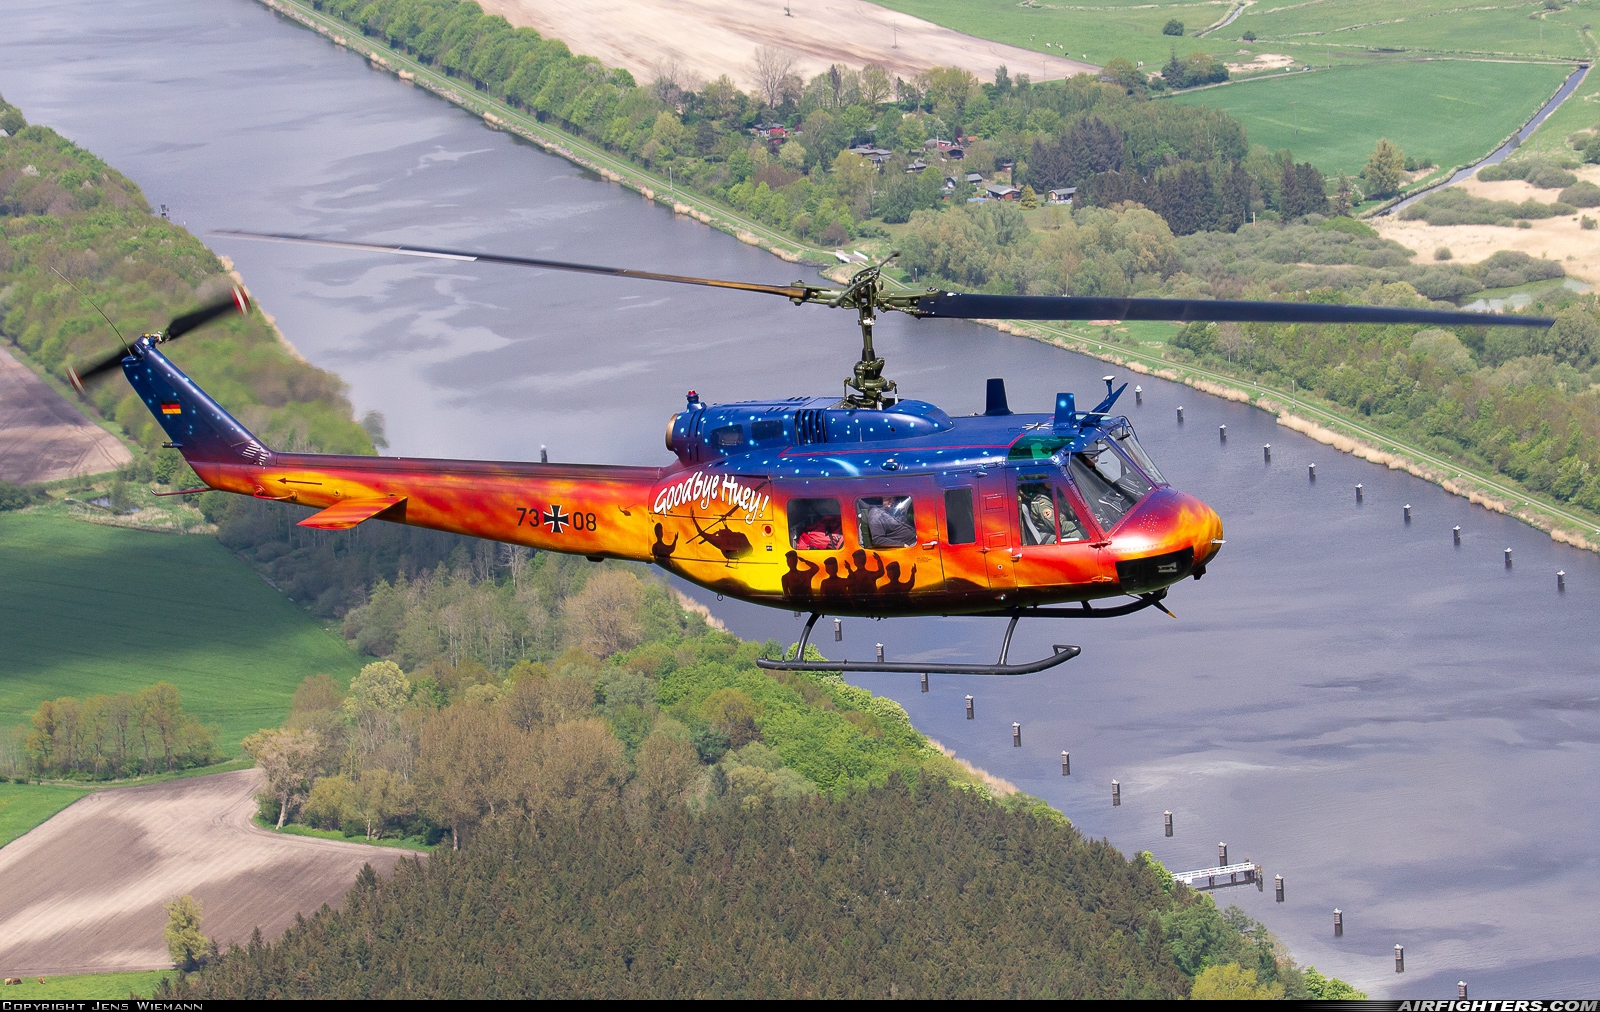 Germany - Army Bell UH-1D Iroquois (205) 73+08 at In Flight, Germany